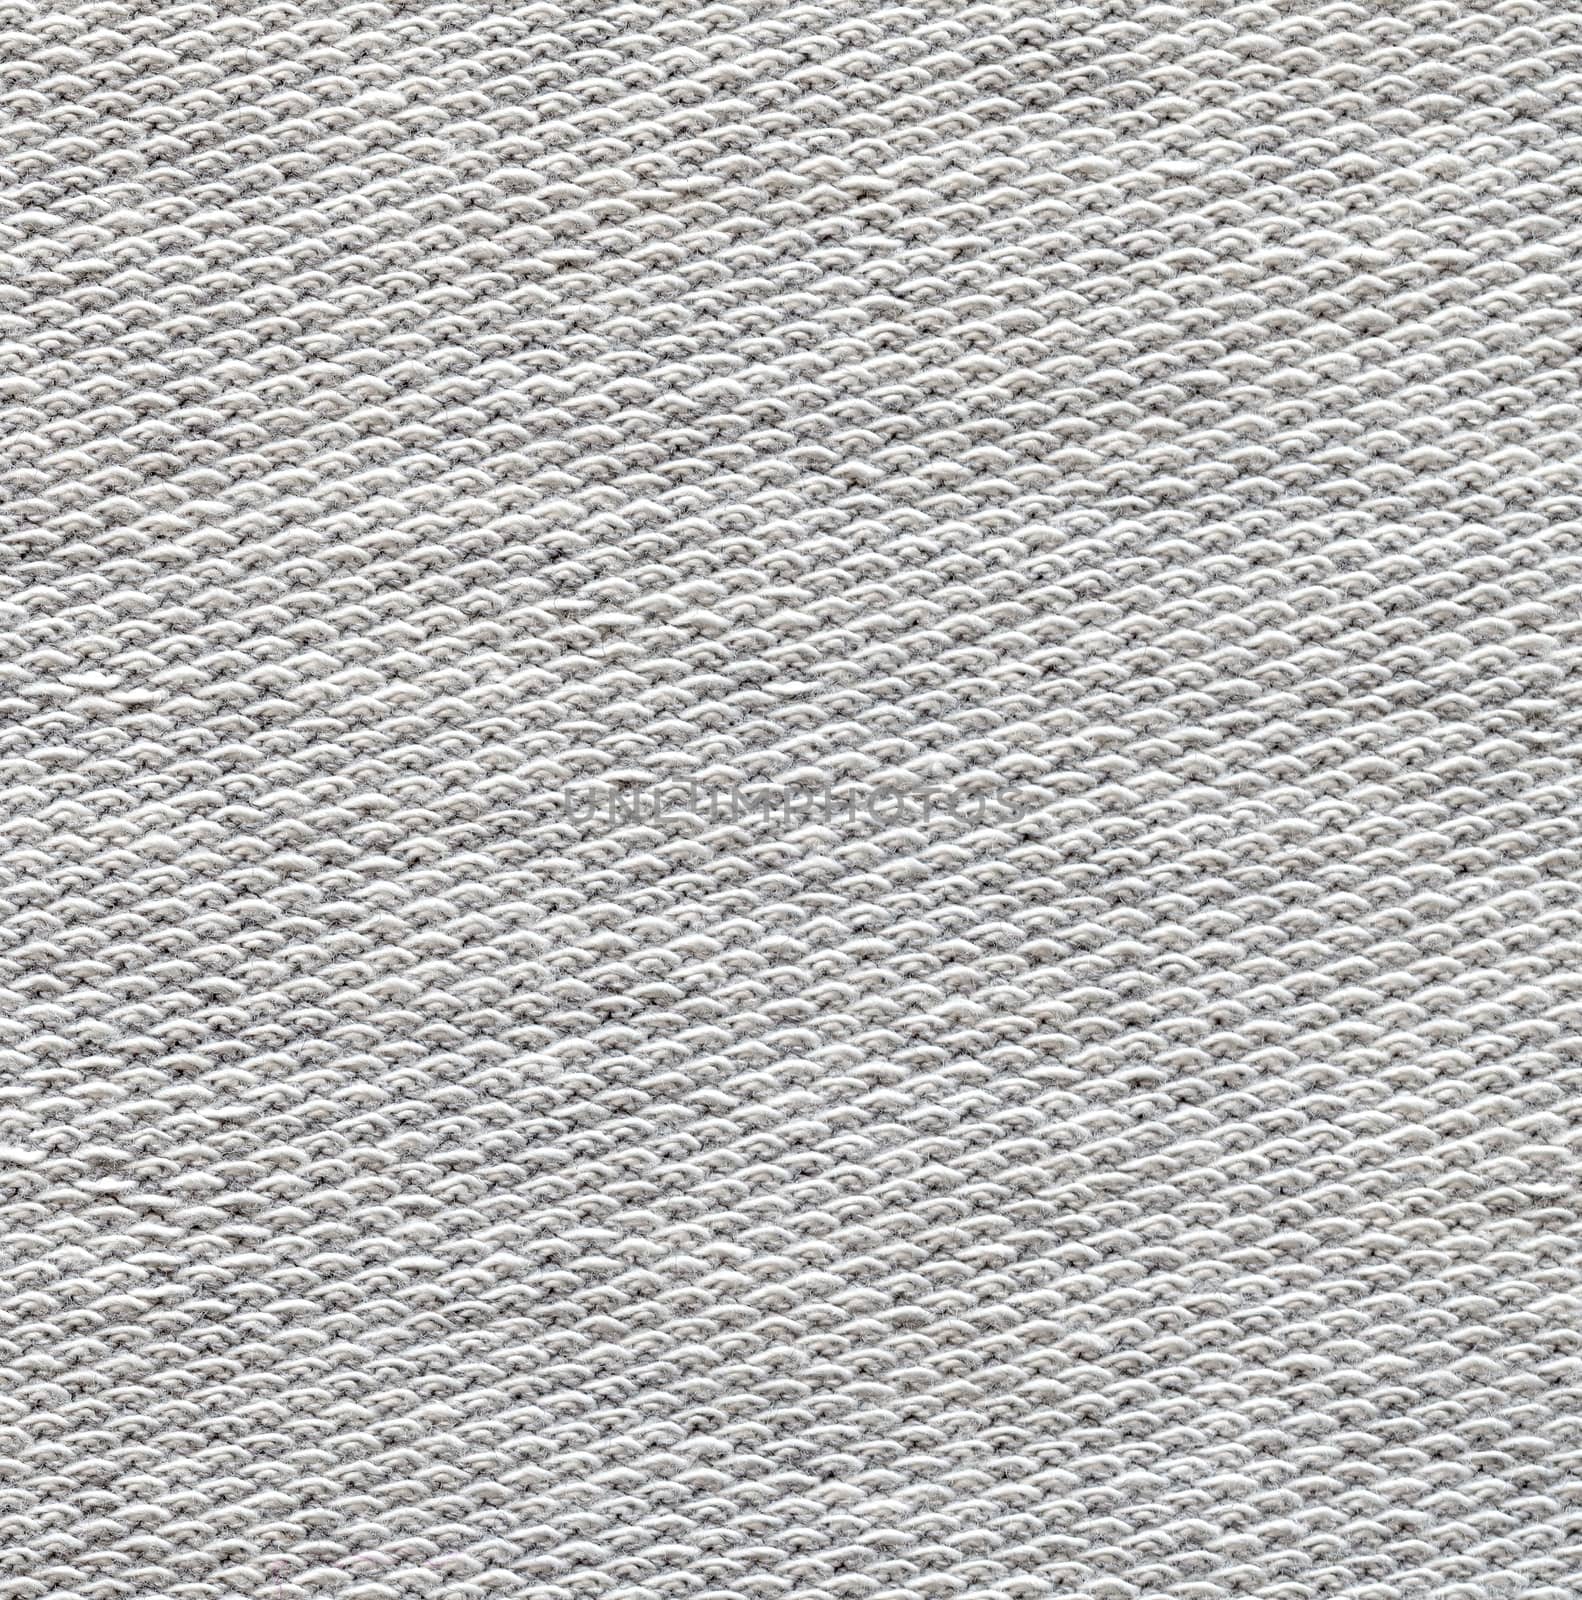 Fabric texture. Light gray color textile background